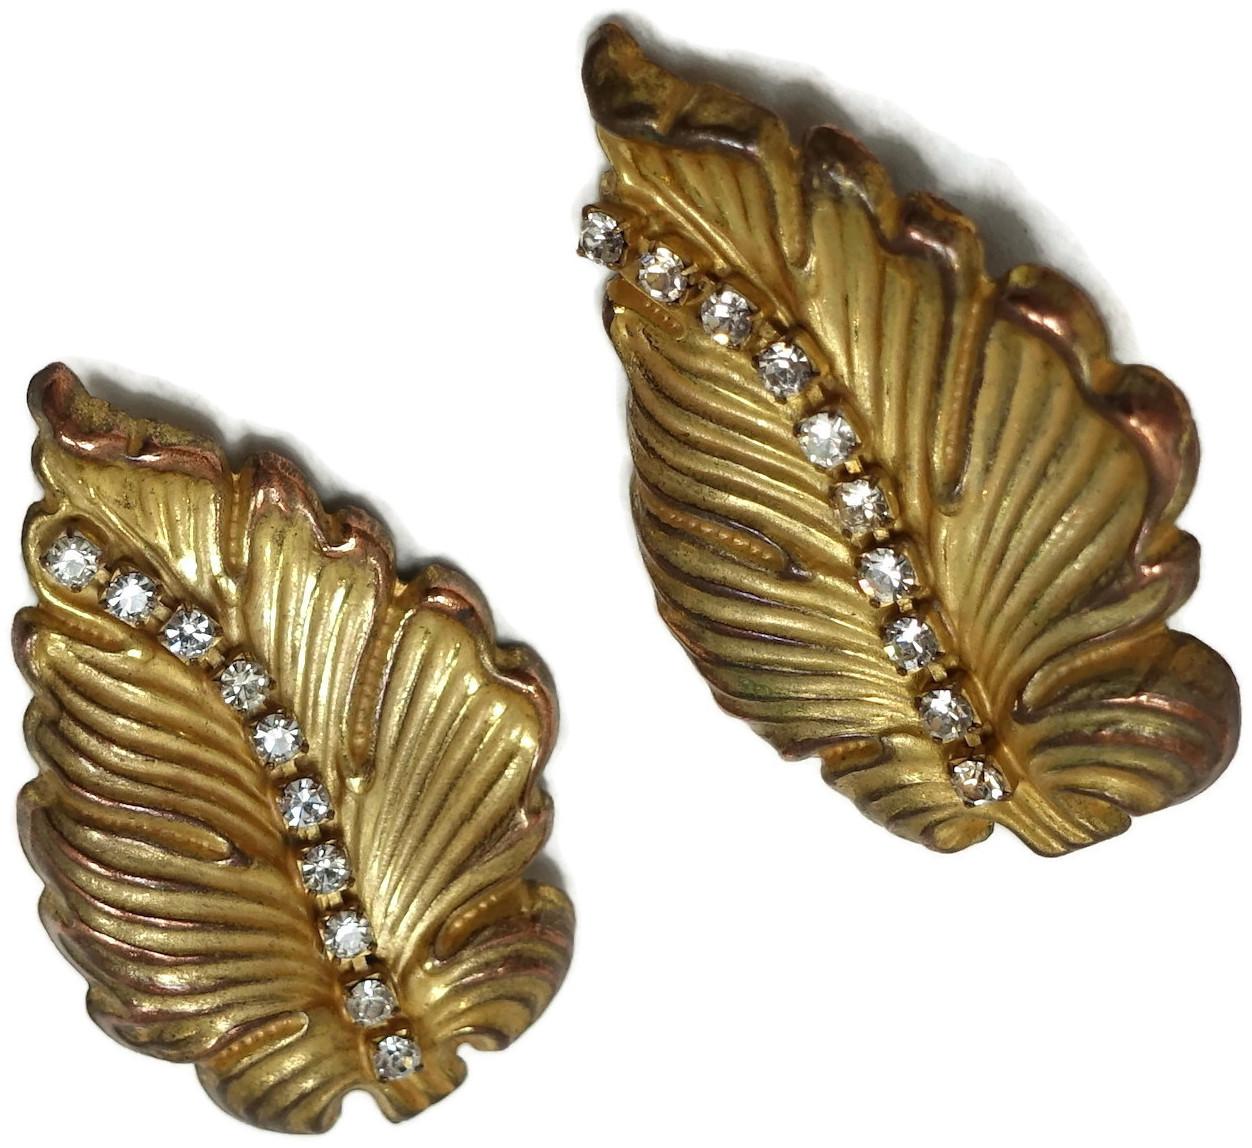 These 1960s vintage signed Miriam Haskell earrings have a gold tone leaf design with crystal accents.  In excellent condition, these clip earrings measure 1-3/4” x 1” and are signed “Haskell”.